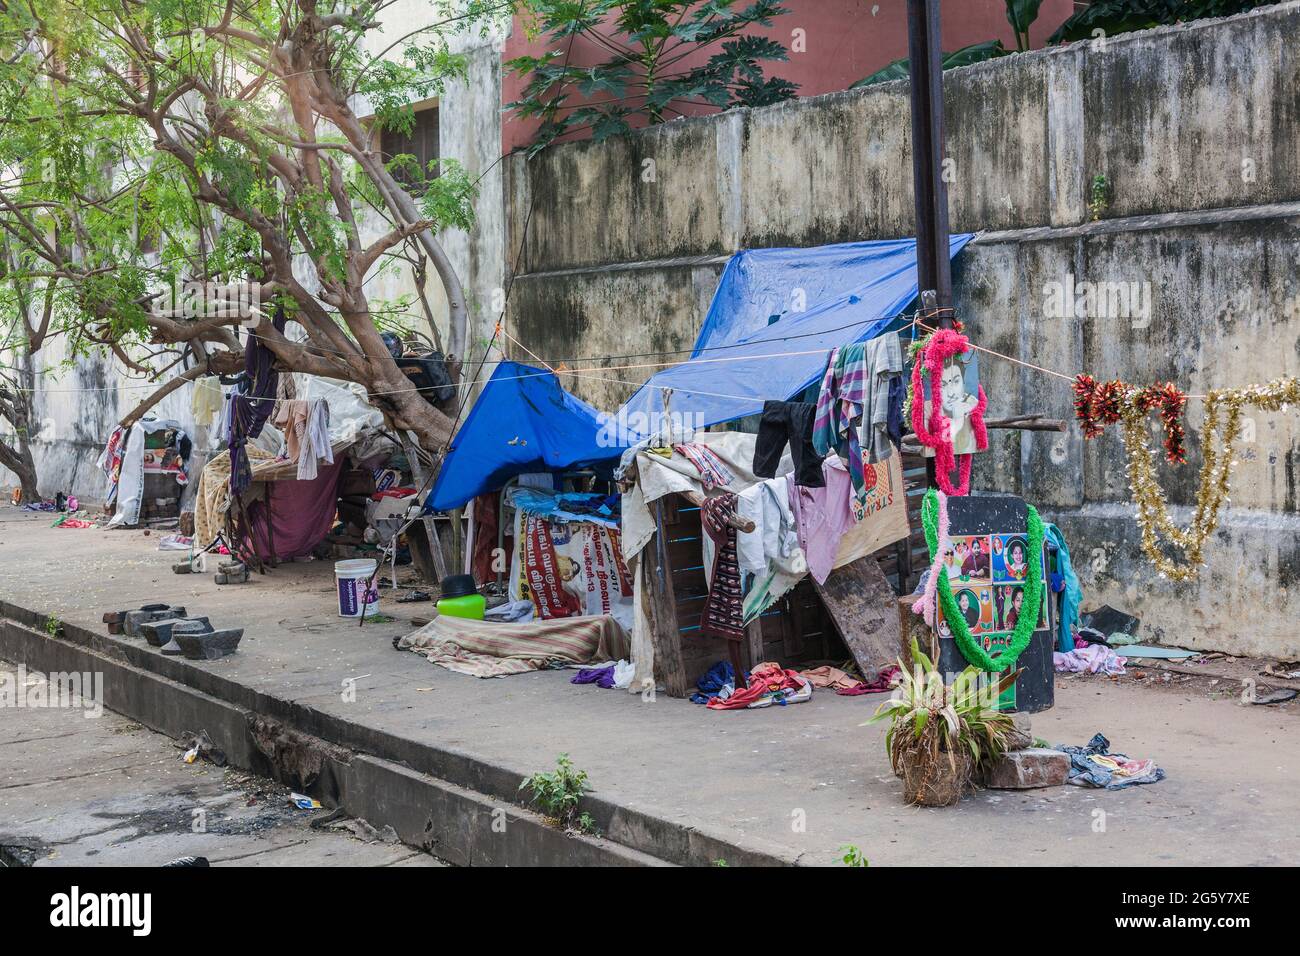 Temporary makeshift home built with tarpaulin on street with clothes hanging on washing line, Puducherry (Pondicherry), Tamil Nadu, India Stock Photo